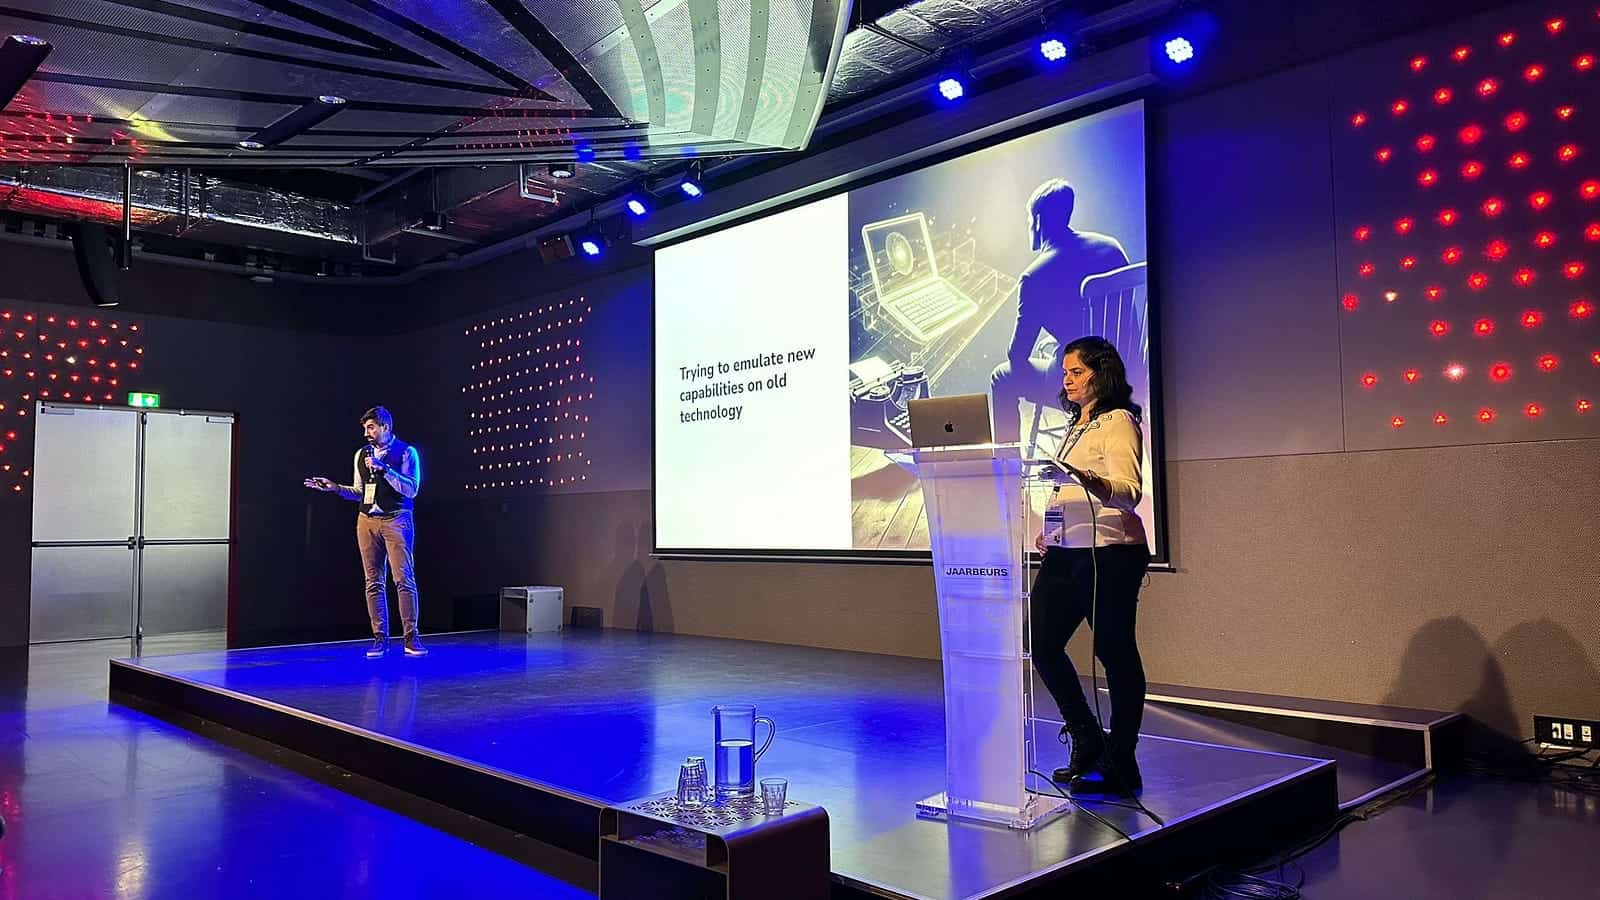 Andrea and Shweta gave talk about "Trying to emulate new capabilities on old technology" on stage